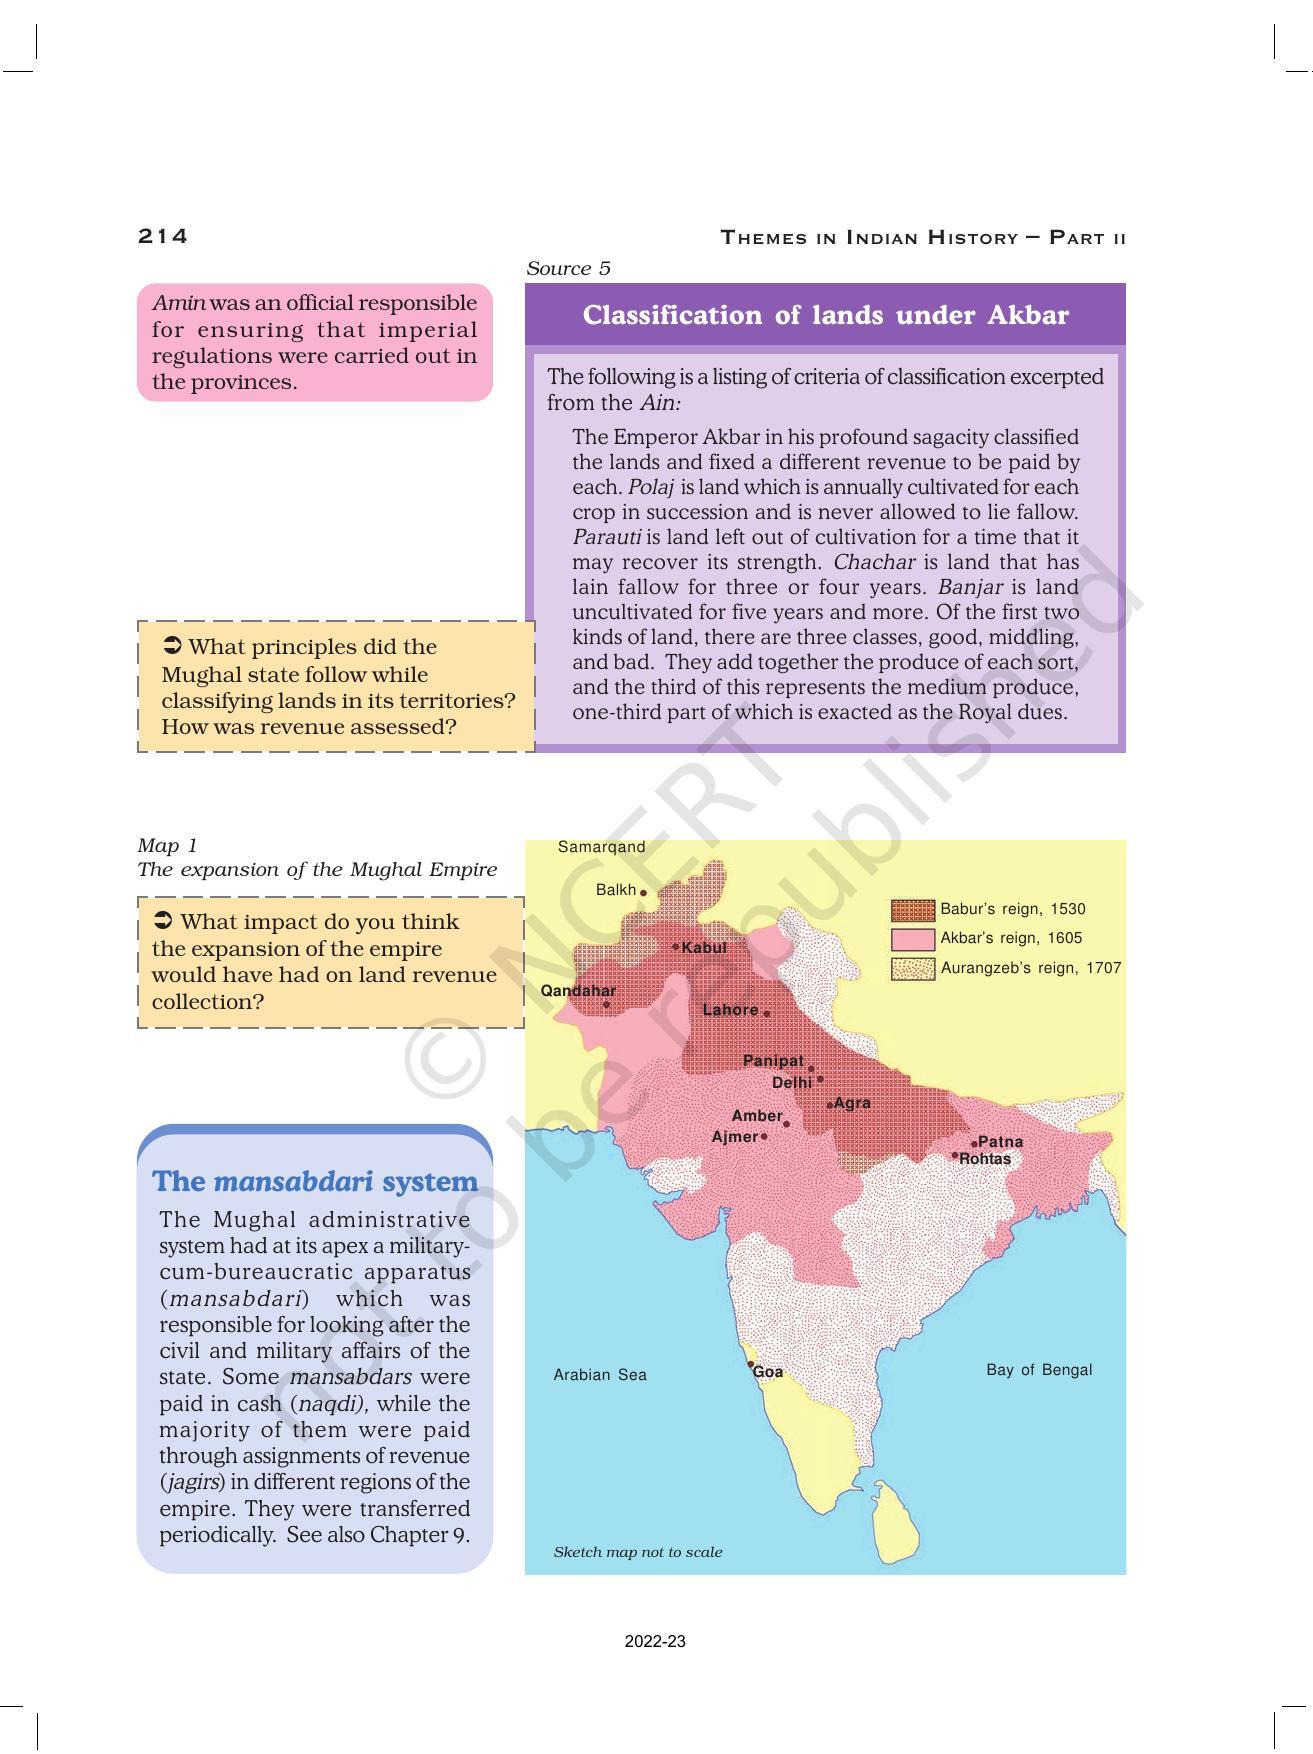 NCERT Book for Class 12 History (Part-II) Chapter 8 Peasants, Zamindars, and the State - Page 19